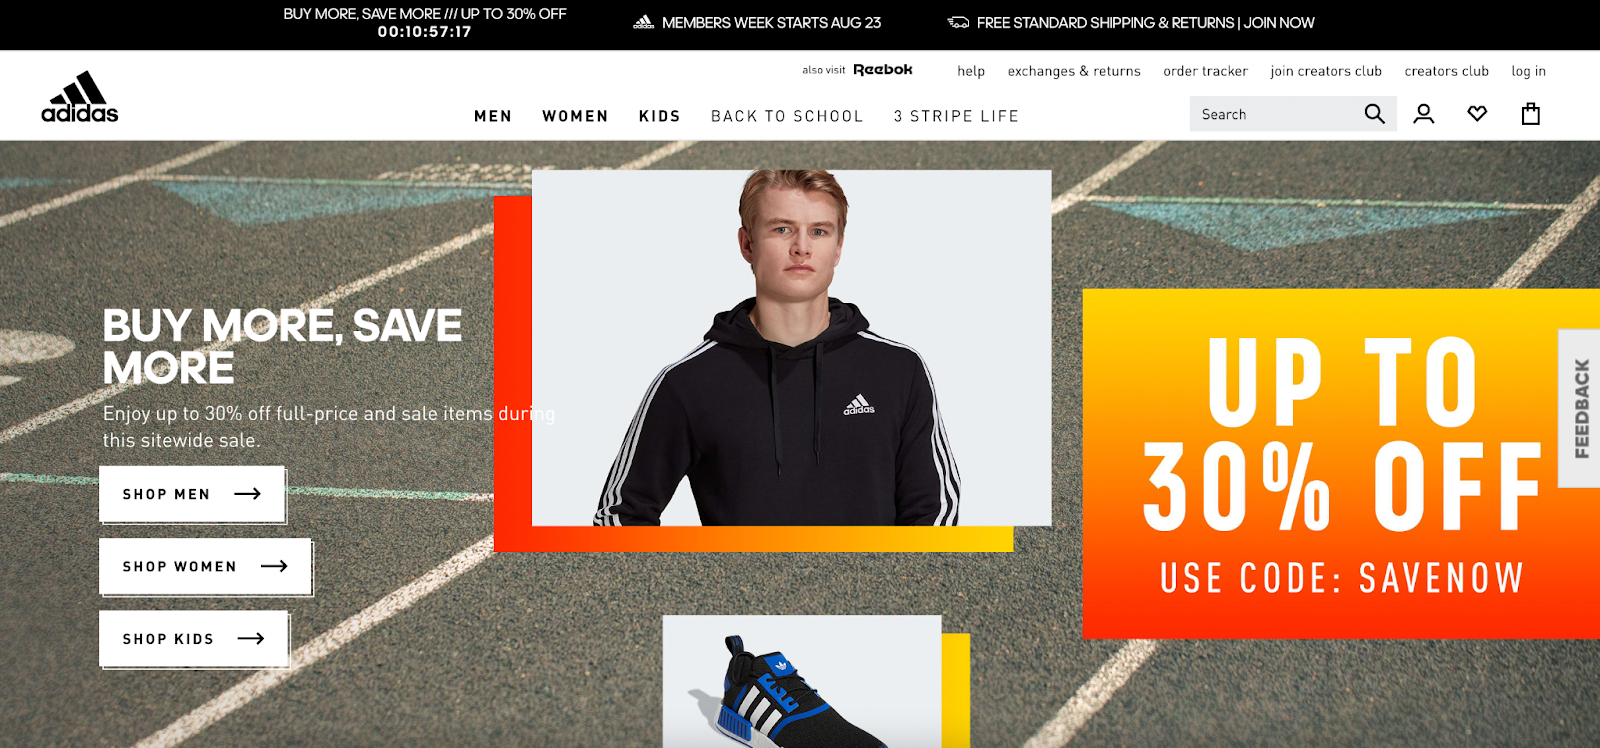 The homepage of the Adidas website